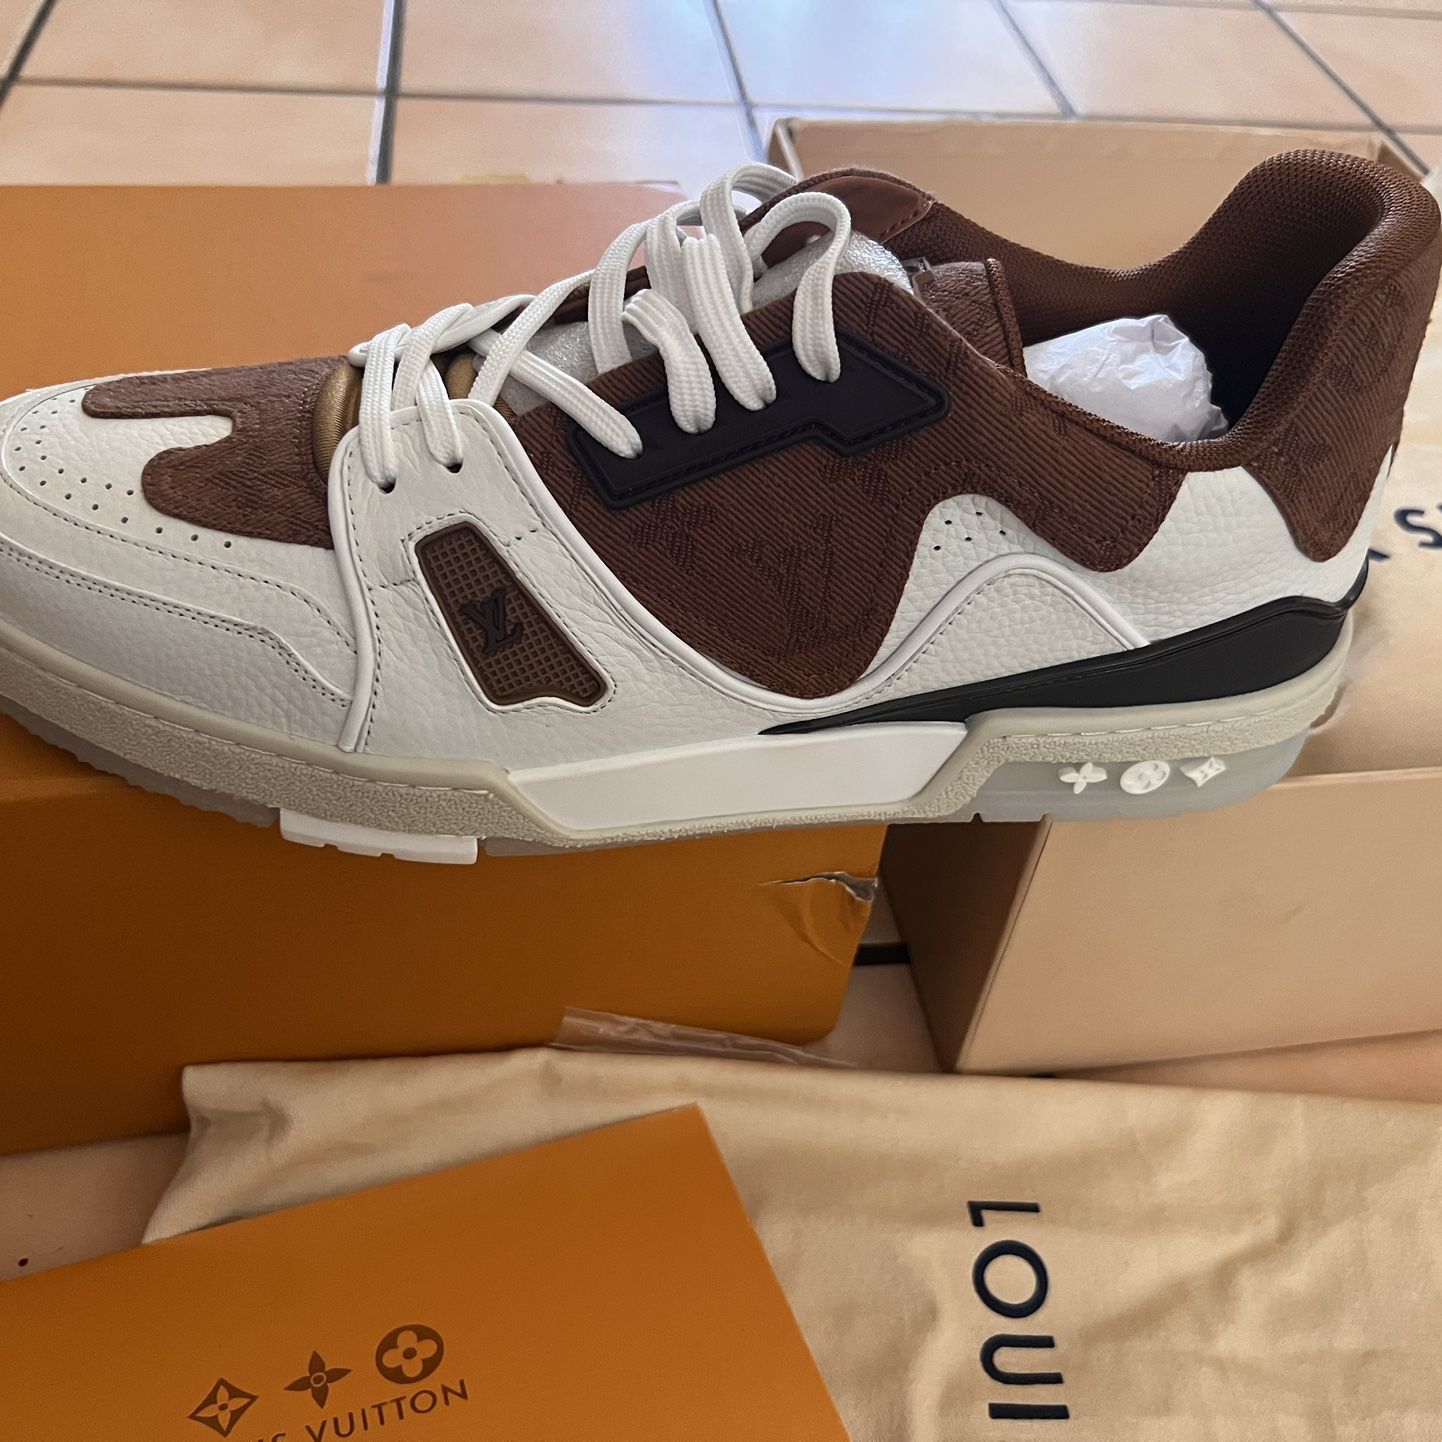 Louis Vuitton Pink Rose Trainers for Sale in Phoenix, AZ - OfferUp